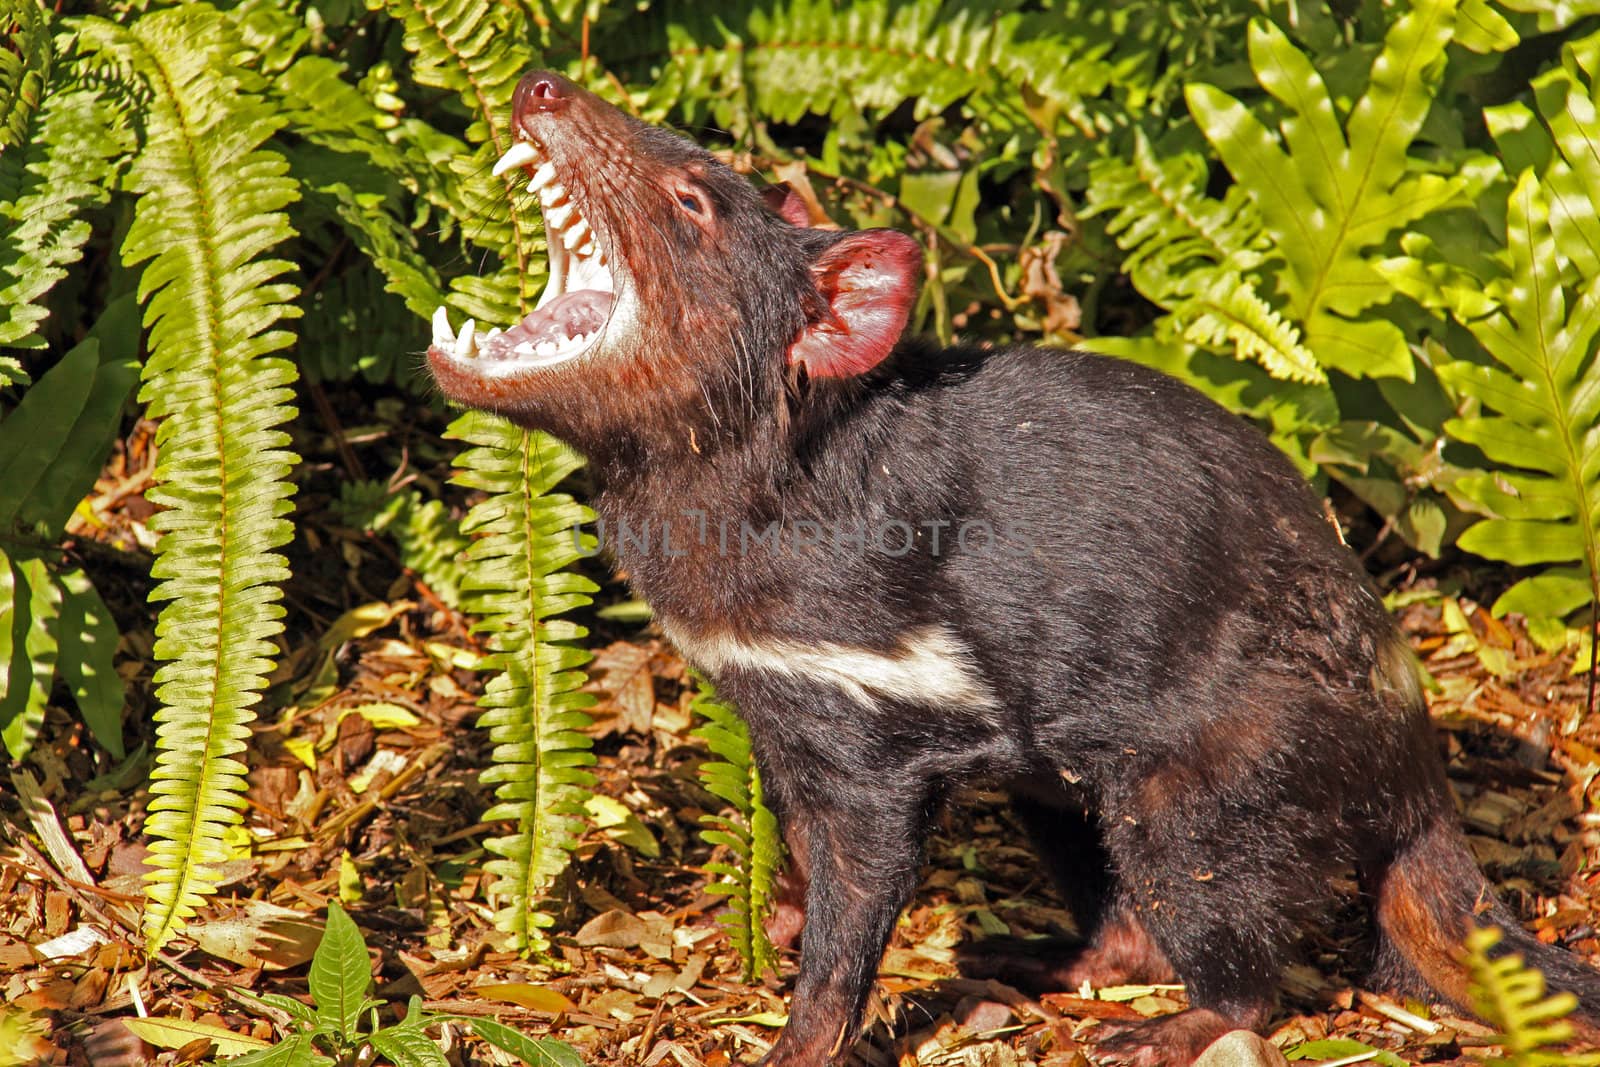 Tasmanian Devil growling. Native Australian animal and is an endangered species. Sarcophilus harrisii